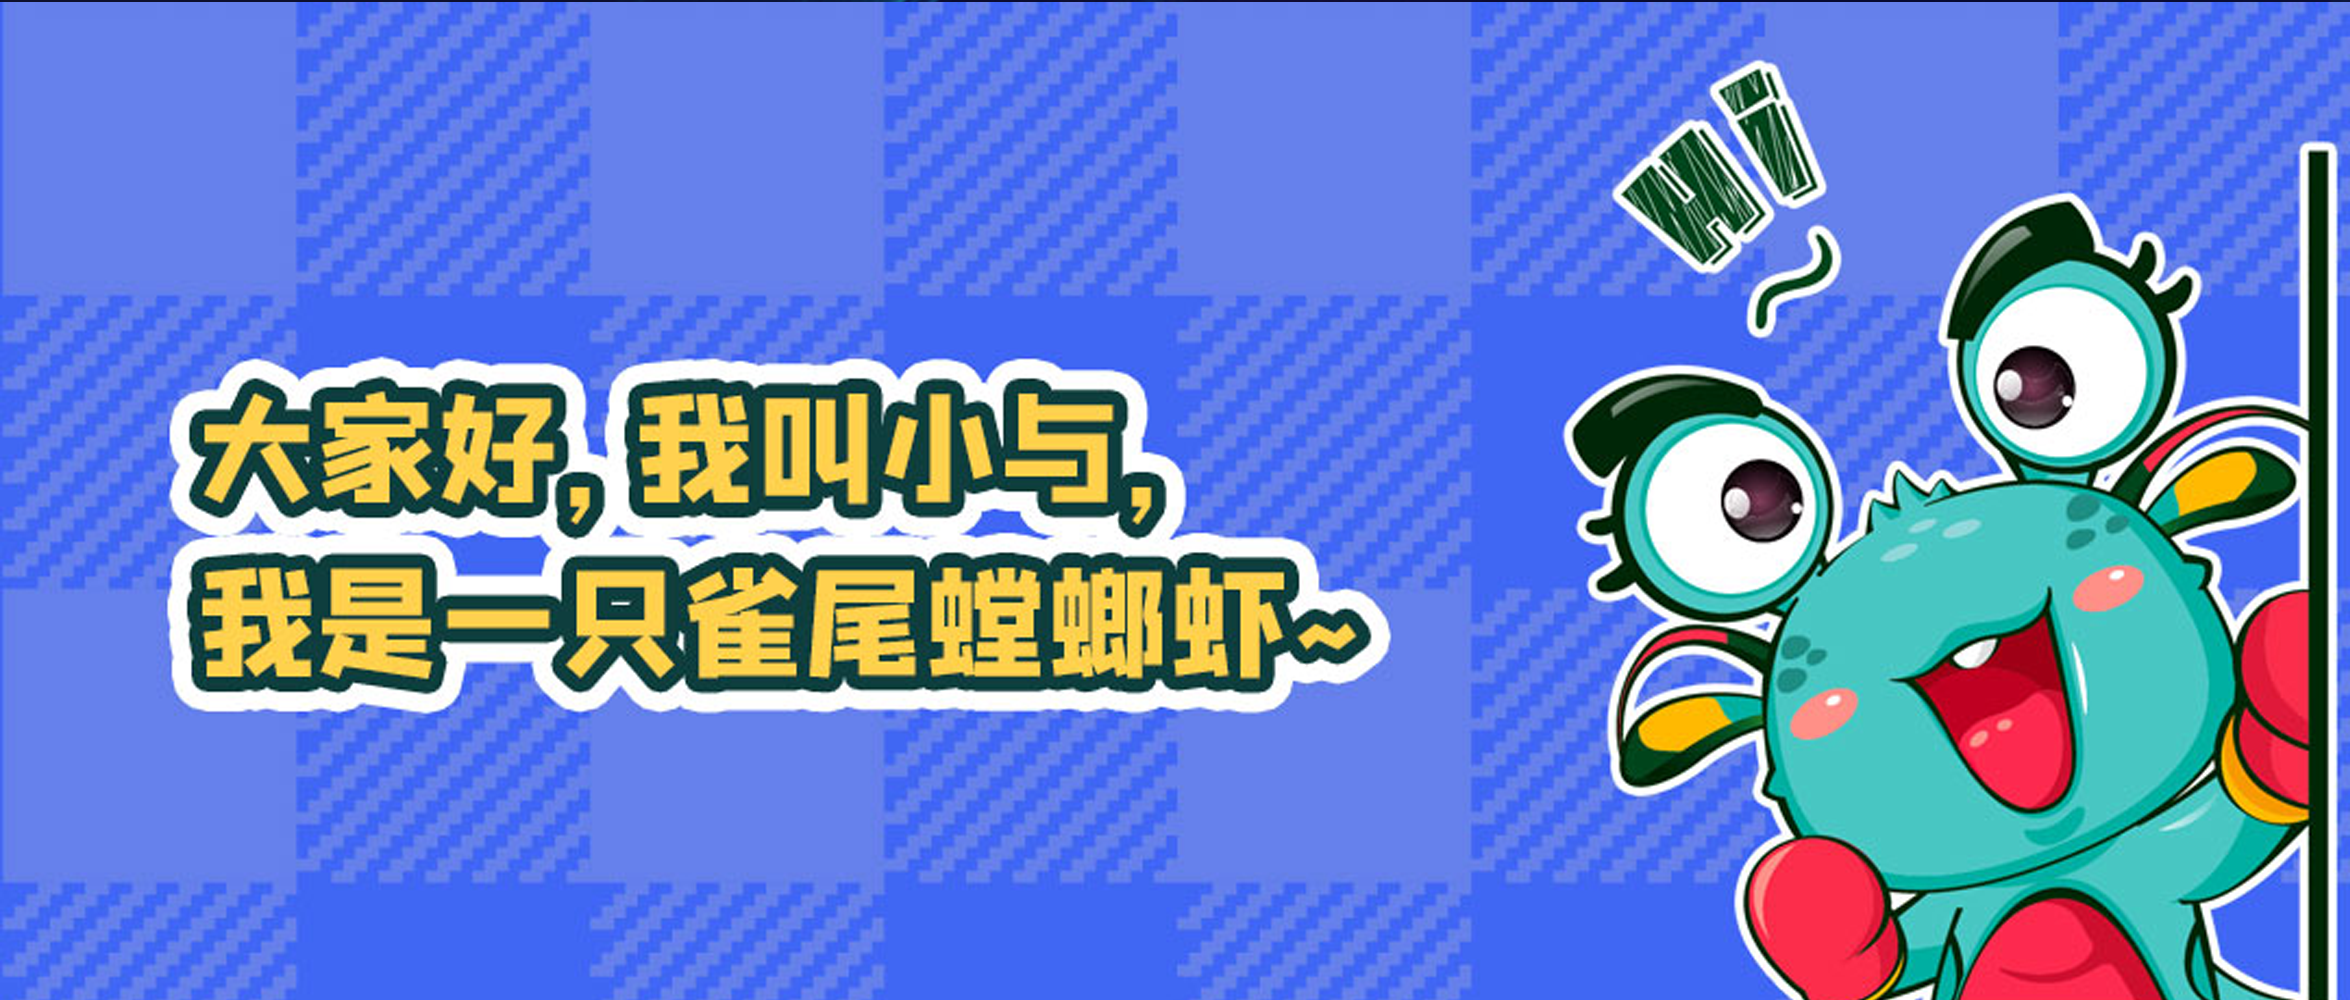 Official Announcement: SEETRUM Mascot "Xiao Yu" Has Made its Debut!